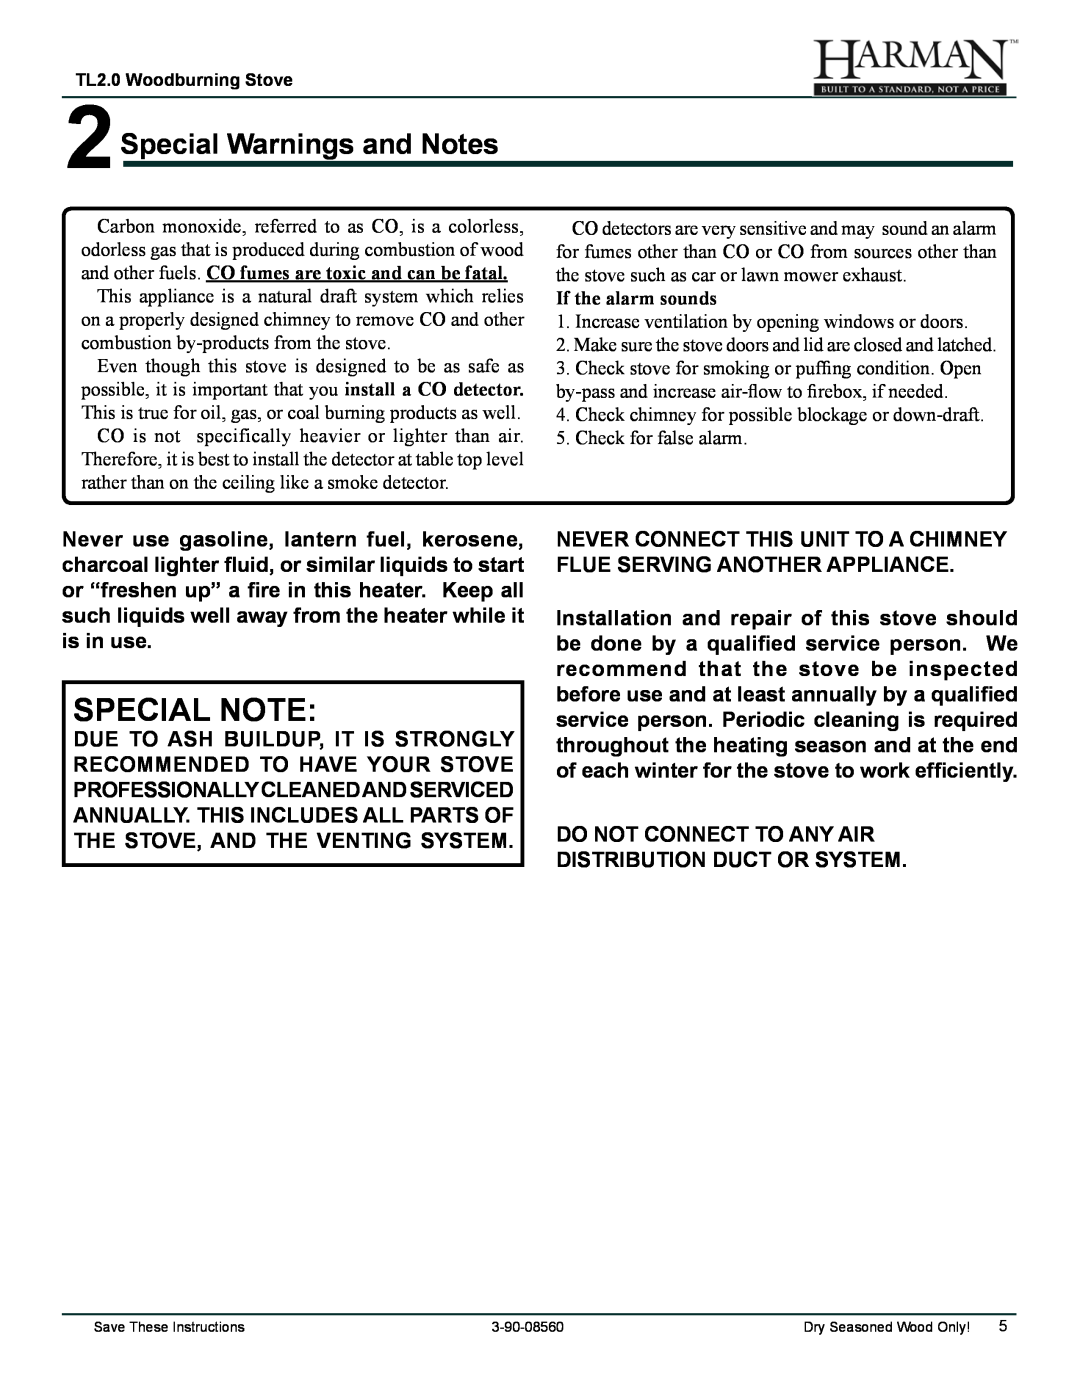 Harman Stove Company TL2.0 manual Special Note, 2Special Warnings and Notes 